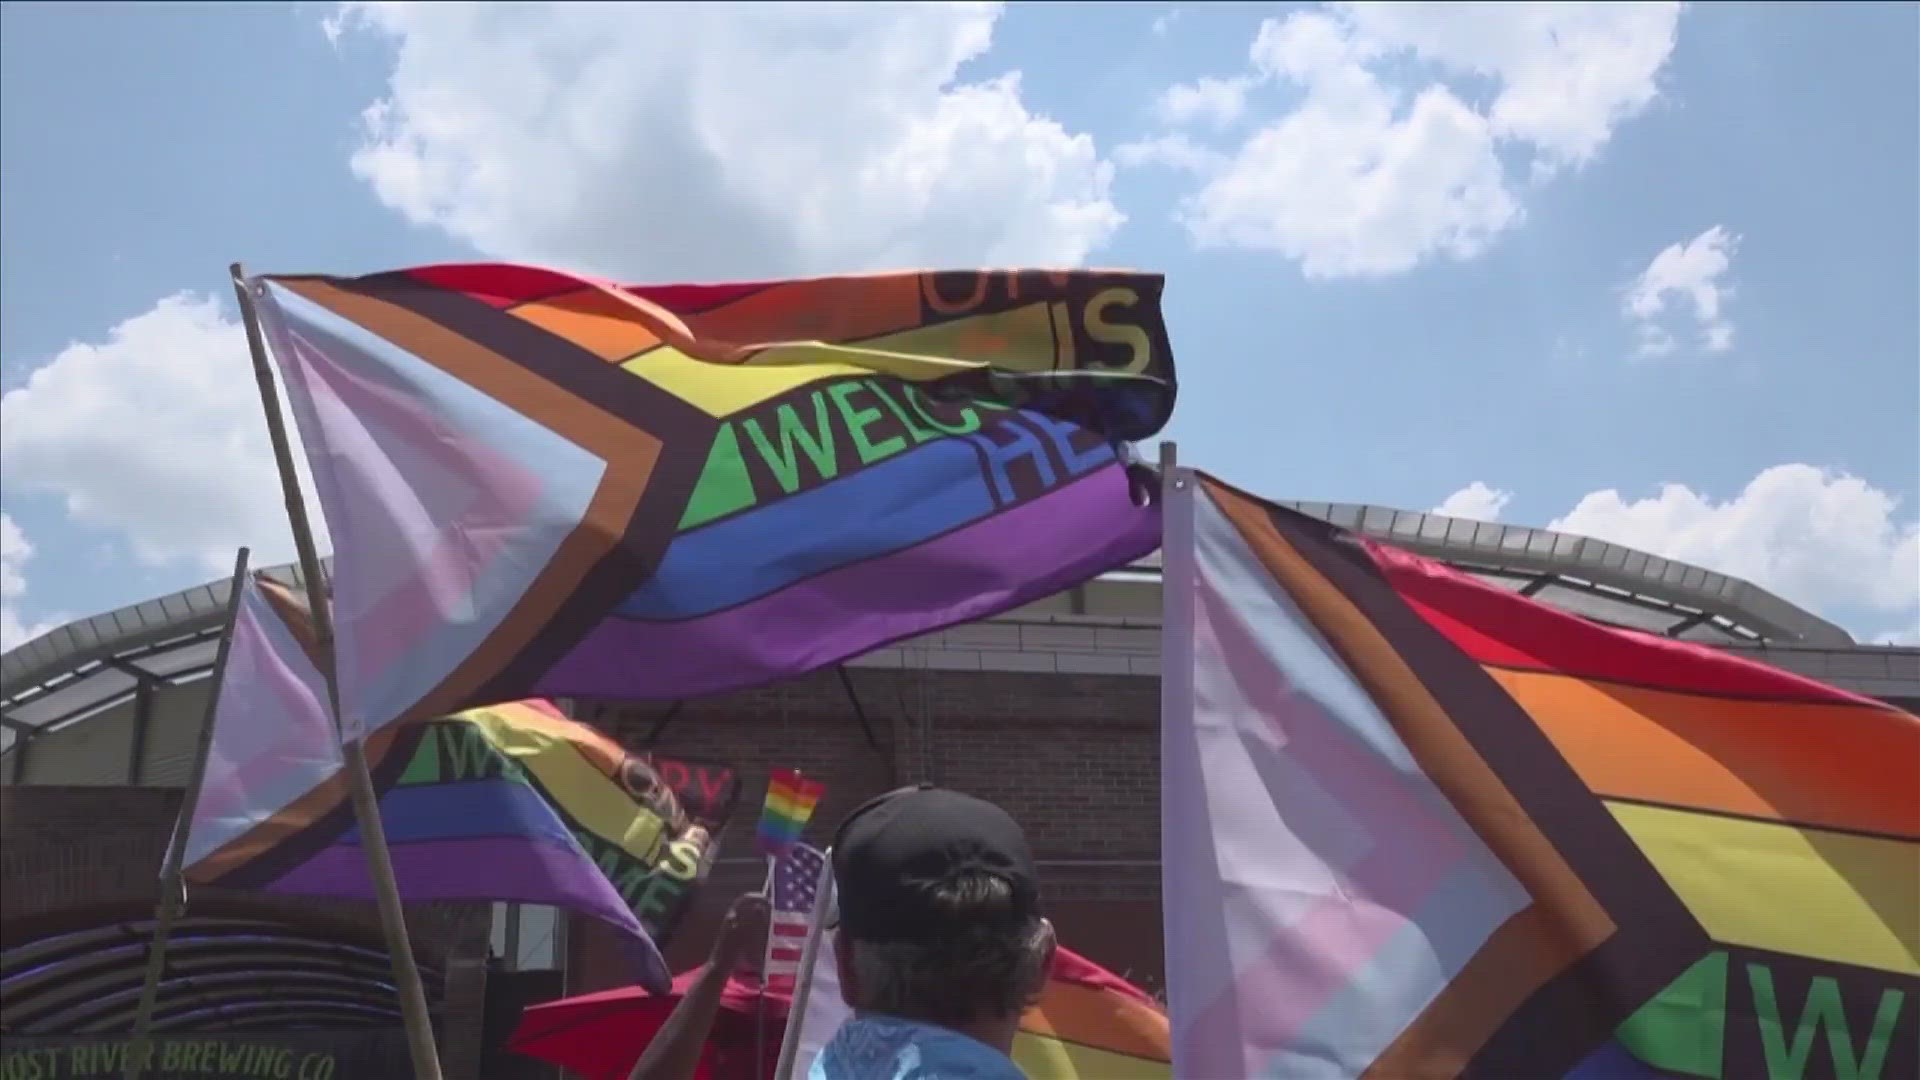 The decision was marked as a victory for members of the LGBTQ+ community in the Mid-South.